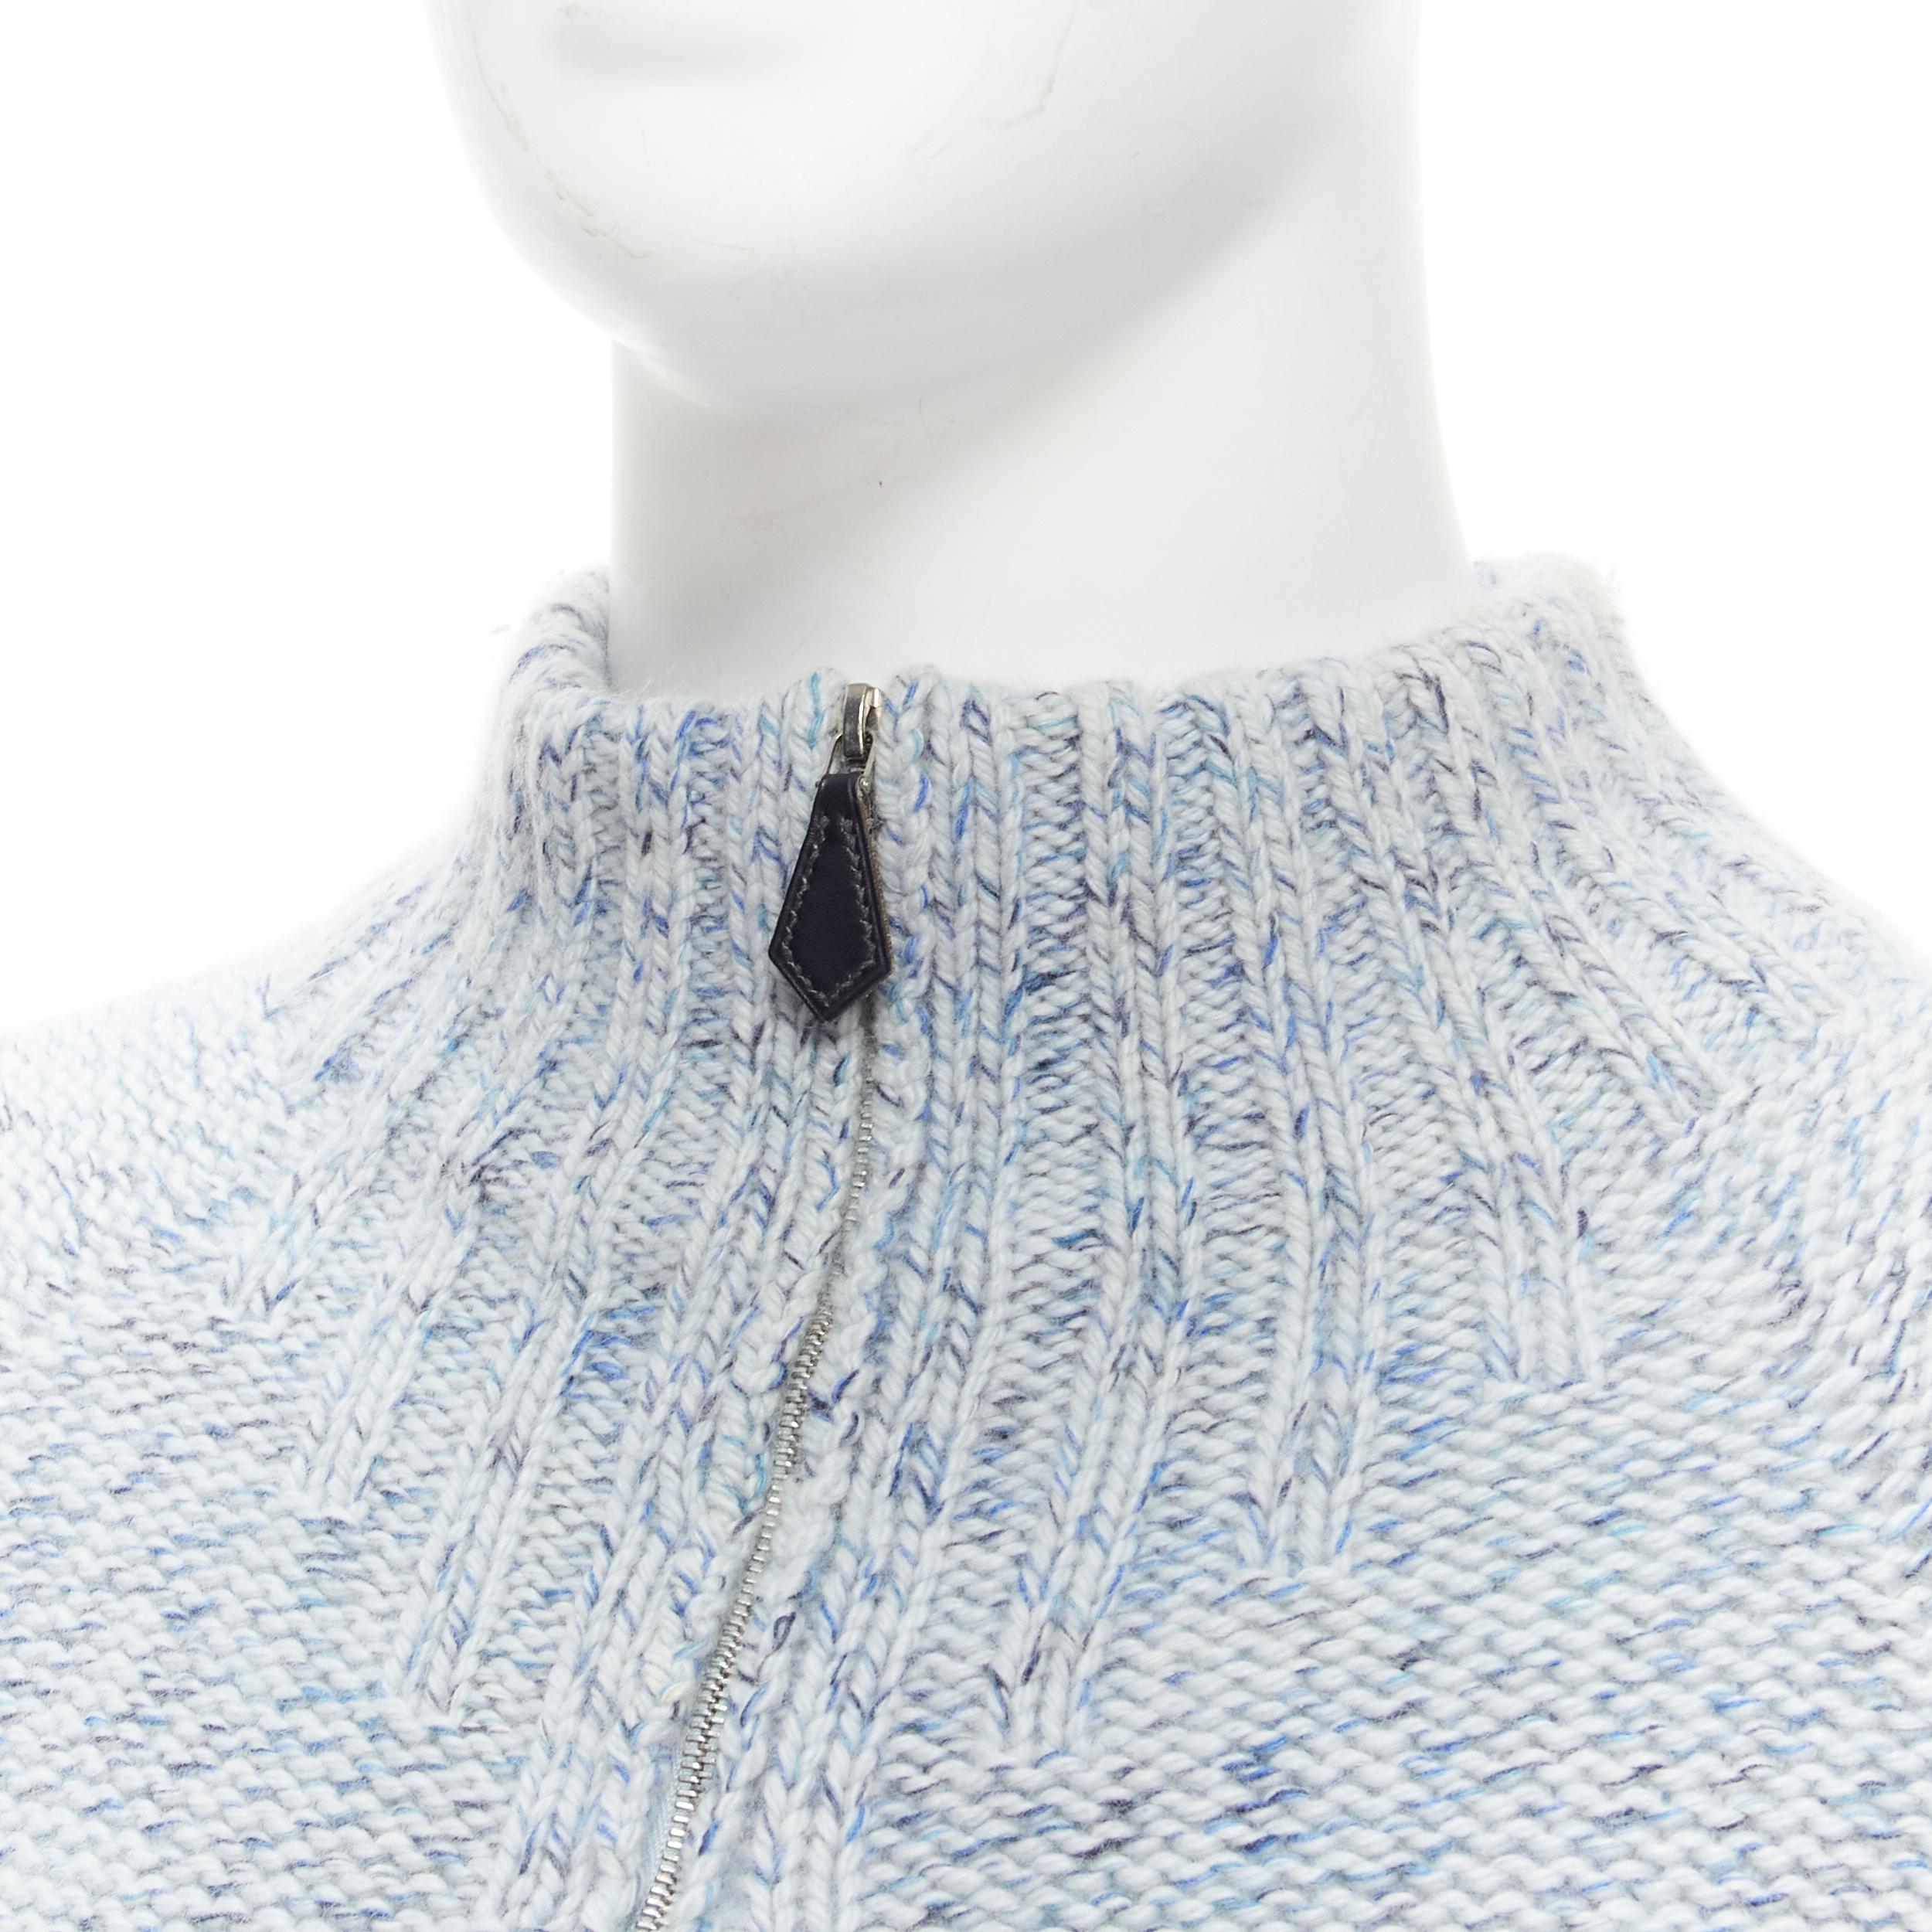 HERMES 100% cashmere blue speckle leather half zip high neck sweater L
Reference: TGAS/C01896
Brand: Hermes
Material: Cashmere, Leather
Color: Blue
Pattern: Solid
Closure: Zip
Made in: Italy

CONDITION:
Condition: Very good, this item was pre-owned